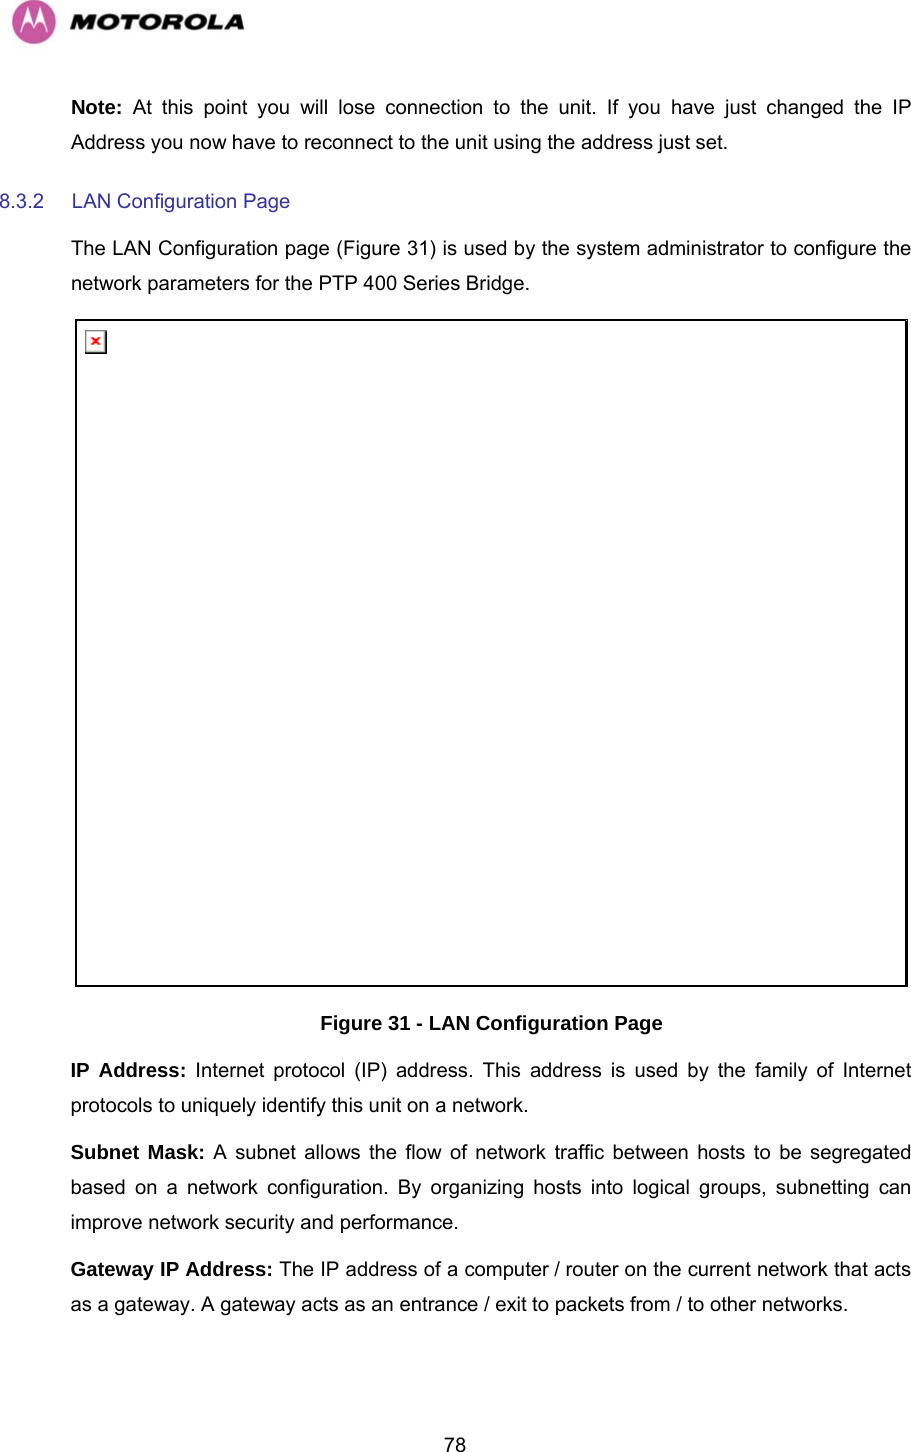   78Note: At this point you will lose connection to the unit. If you have just changed the IP Address you now have to reconnect to the unit using the address just set. 8.3.2  LAN Configuration Page The LAN Configuration page (Figure 31) is used by the system administrator to configure the network parameters for the PTP 400 Series Bridge.  Figure 31 - LAN Configuration Page IP Address: Internet protocol (IP) address. This address is used by the family of Internet protocols to uniquely identify this unit on a network.  Subnet Mask: A subnet allows the flow of network traffic between hosts to be segregated based on a network configuration. By organizing hosts into logical groups, subnetting can improve network security and performance.  Gateway IP Address: The IP address of a computer / router on the current network that acts as a gateway. A gateway acts as an entrance / exit to packets from / to other networks.  